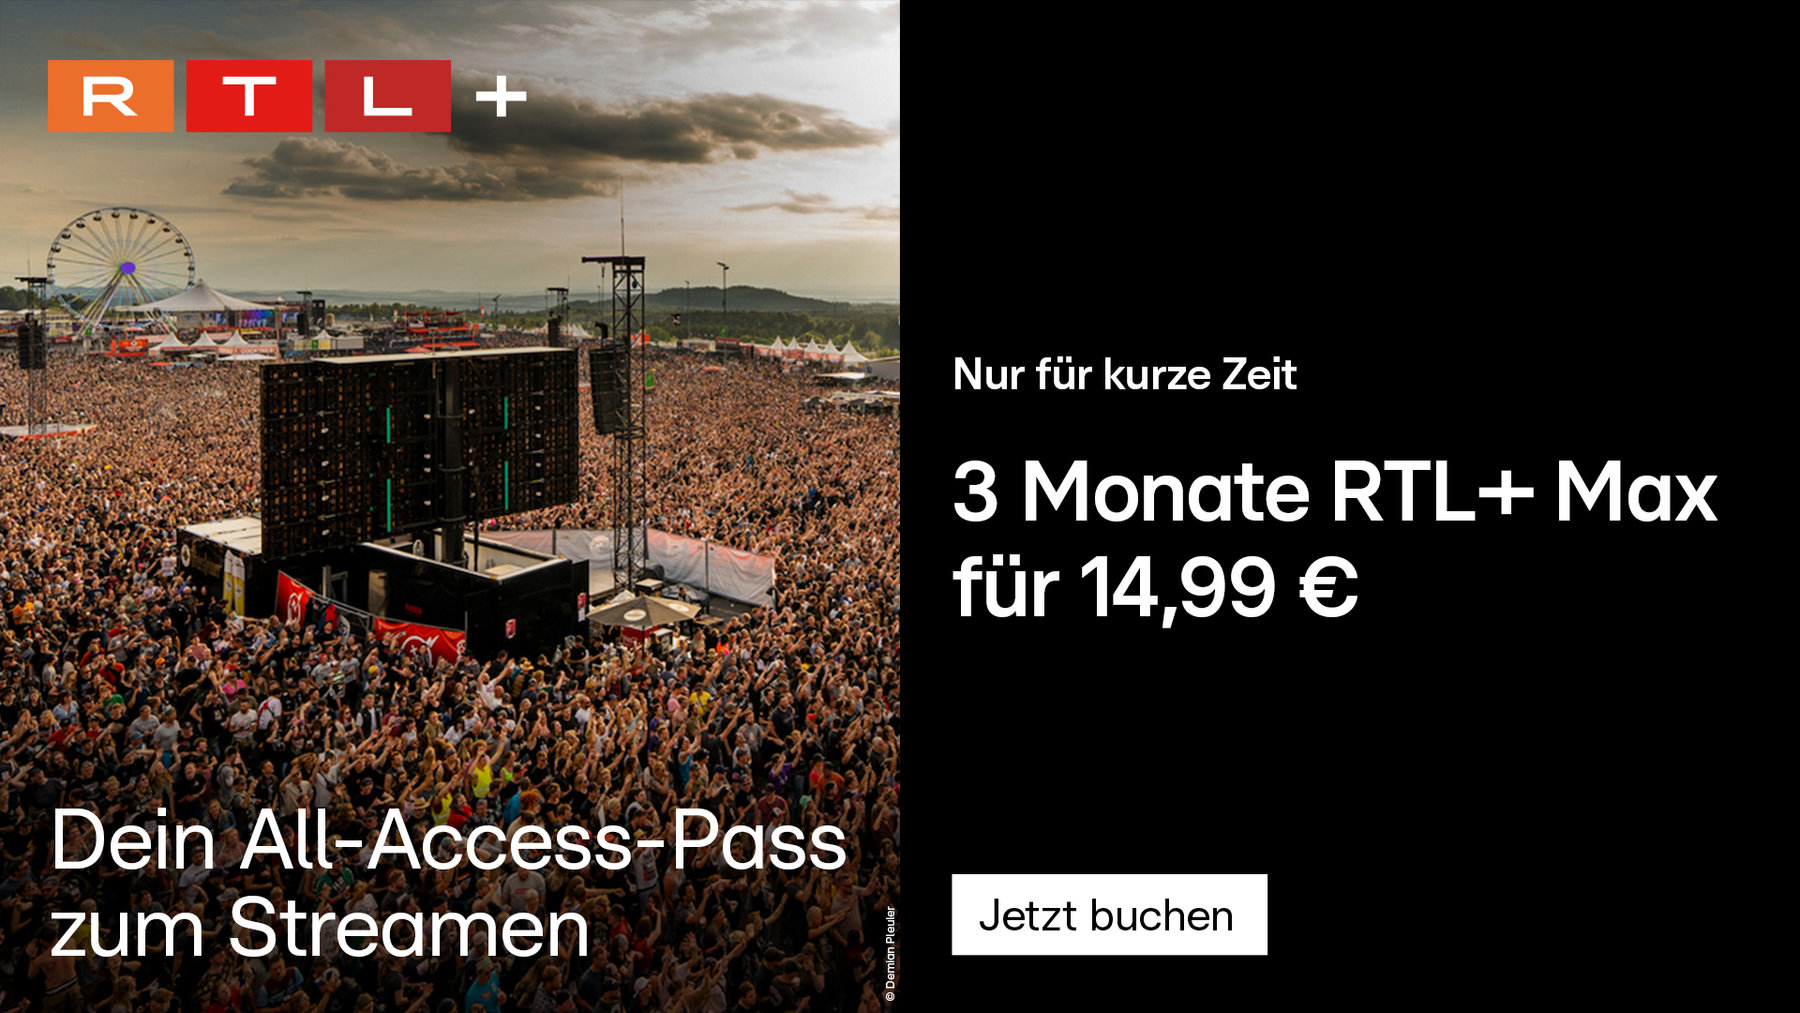 Rock am Ring Special 